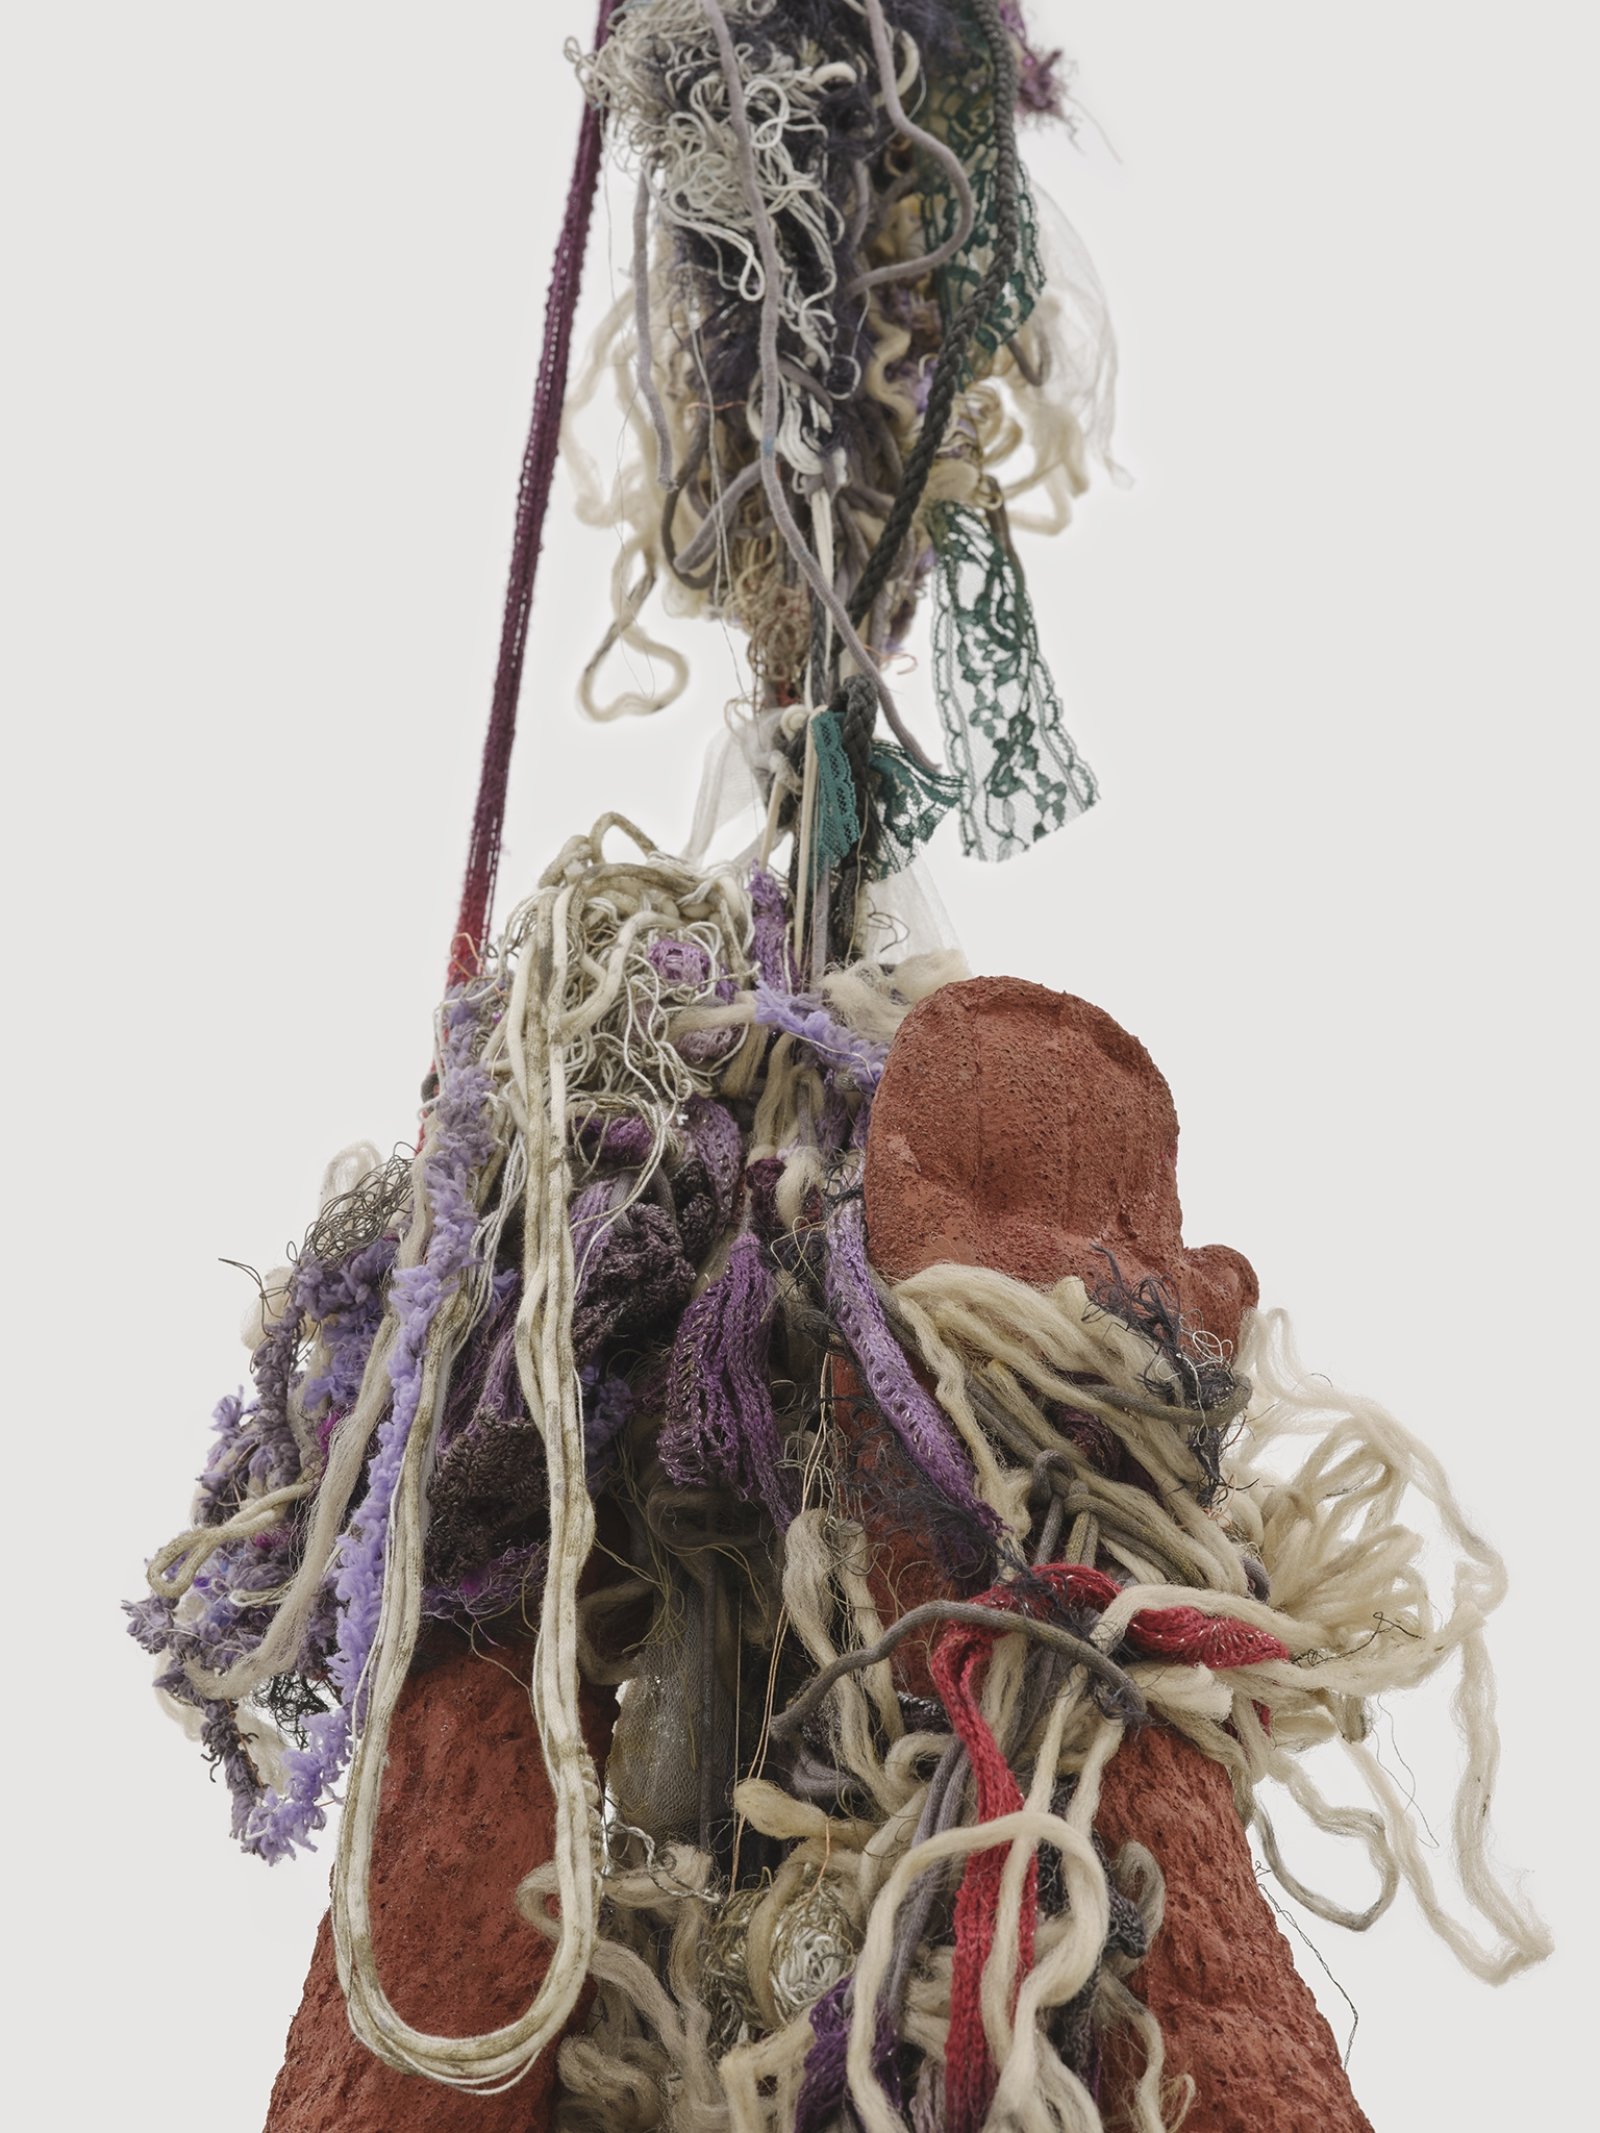 Liz Magor, Delivery (red) (detail), 2018, silicone rubber, textiles, twine, 144 x 24 x 13 in. (366 x 61 x 32 cm)